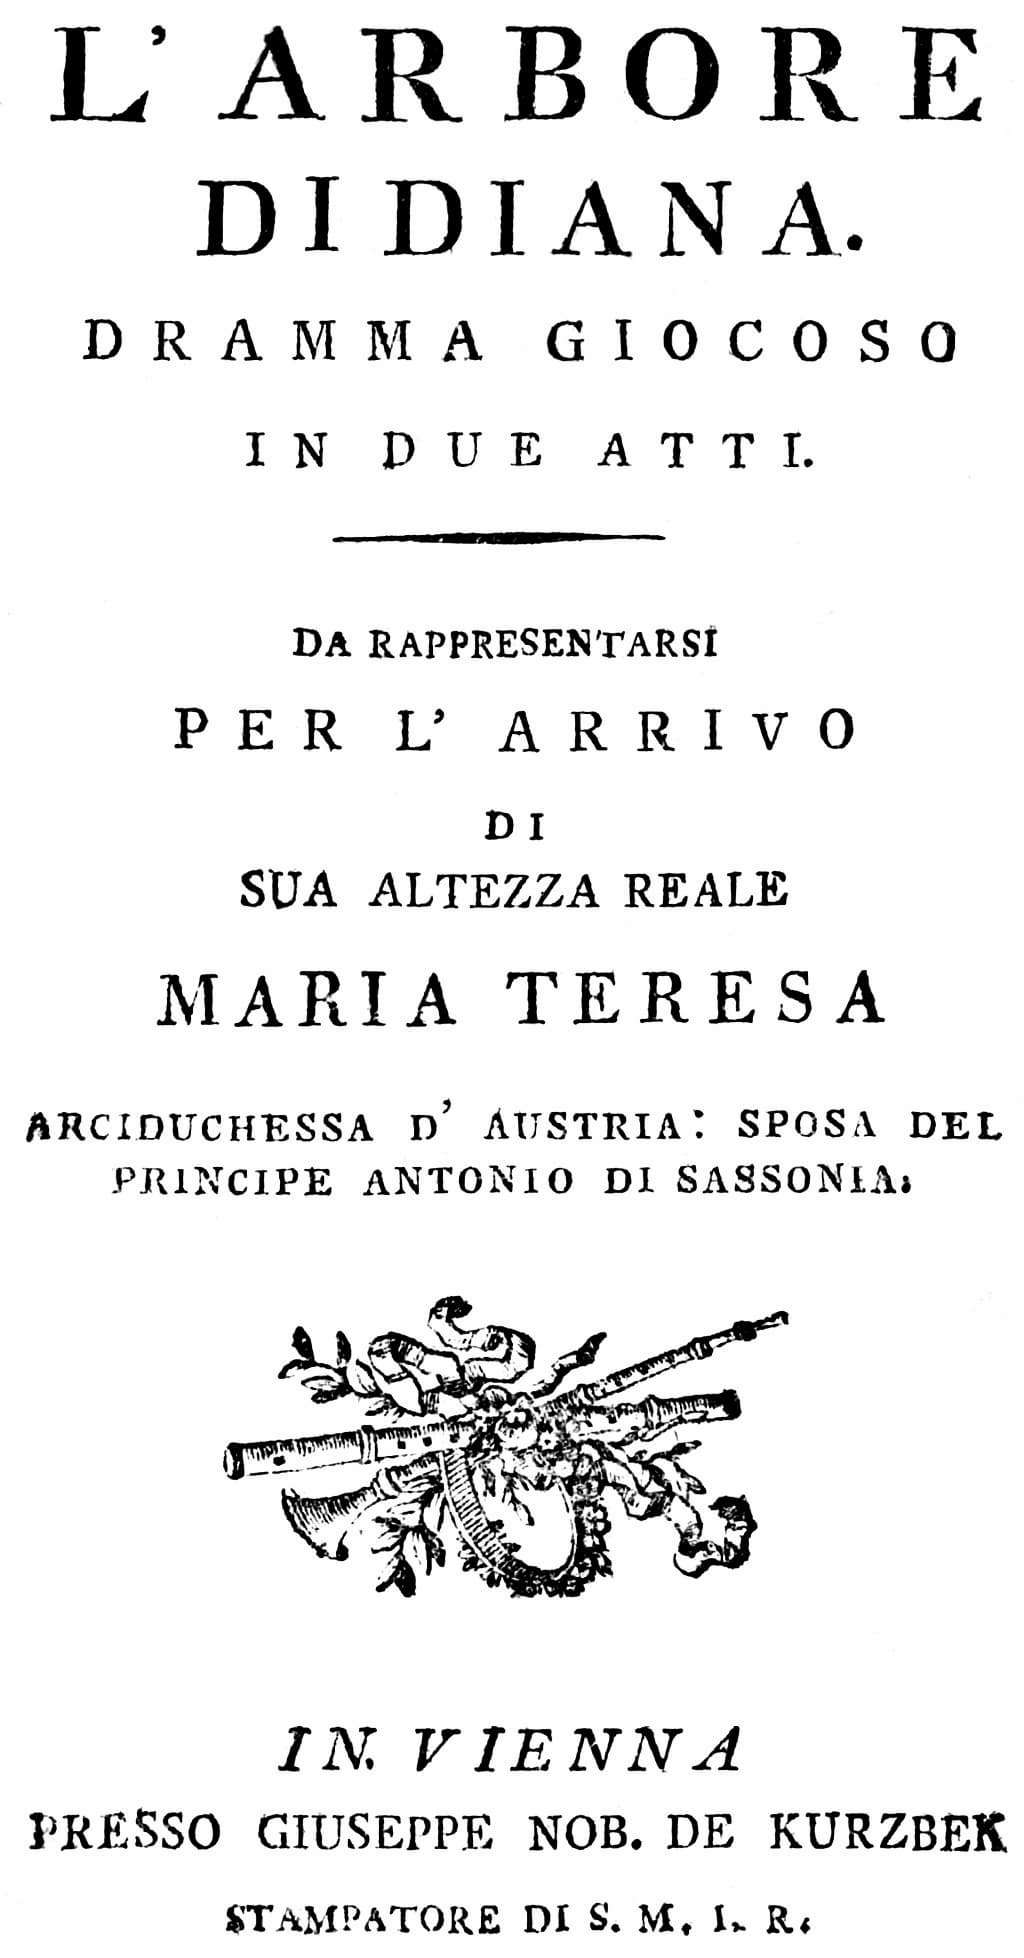 Martin y Soler’s opera The Tree of Diana, title page of the libretto